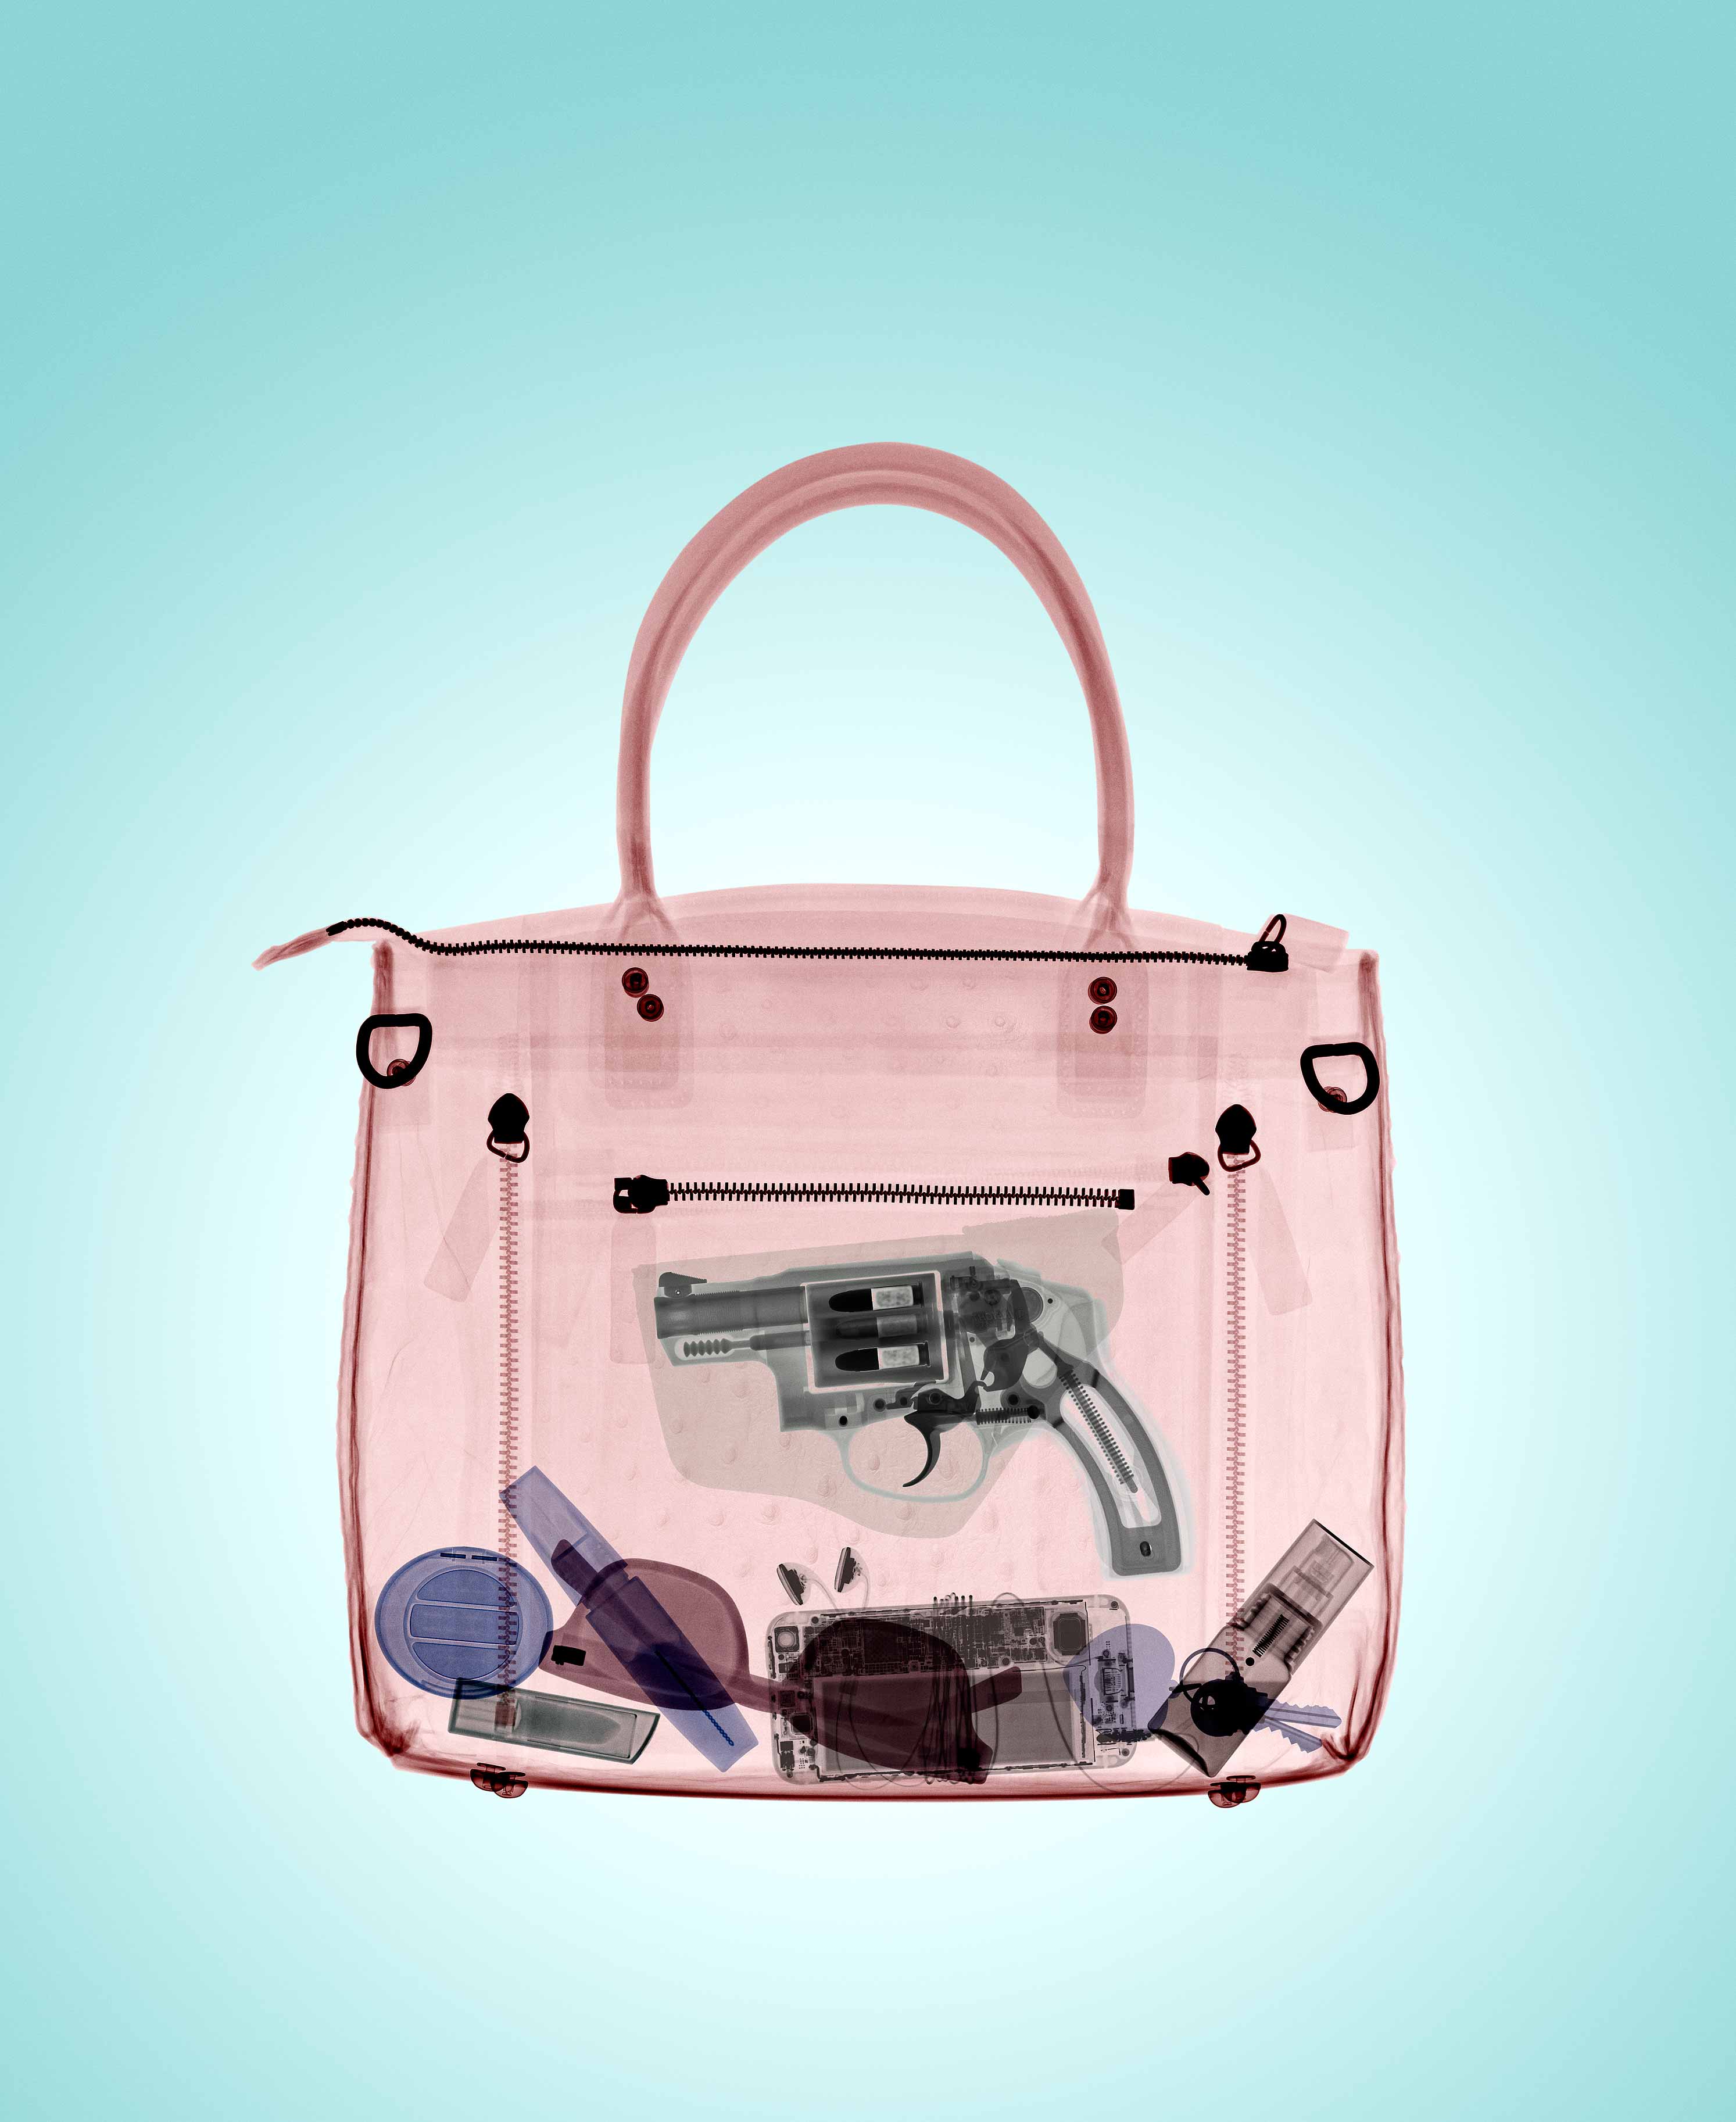 Companies are courting the growing ranks of women carrying concealed weapons with products like this handbag with a hidden gun pouch (Photo-illustration by David Arky for TIME)